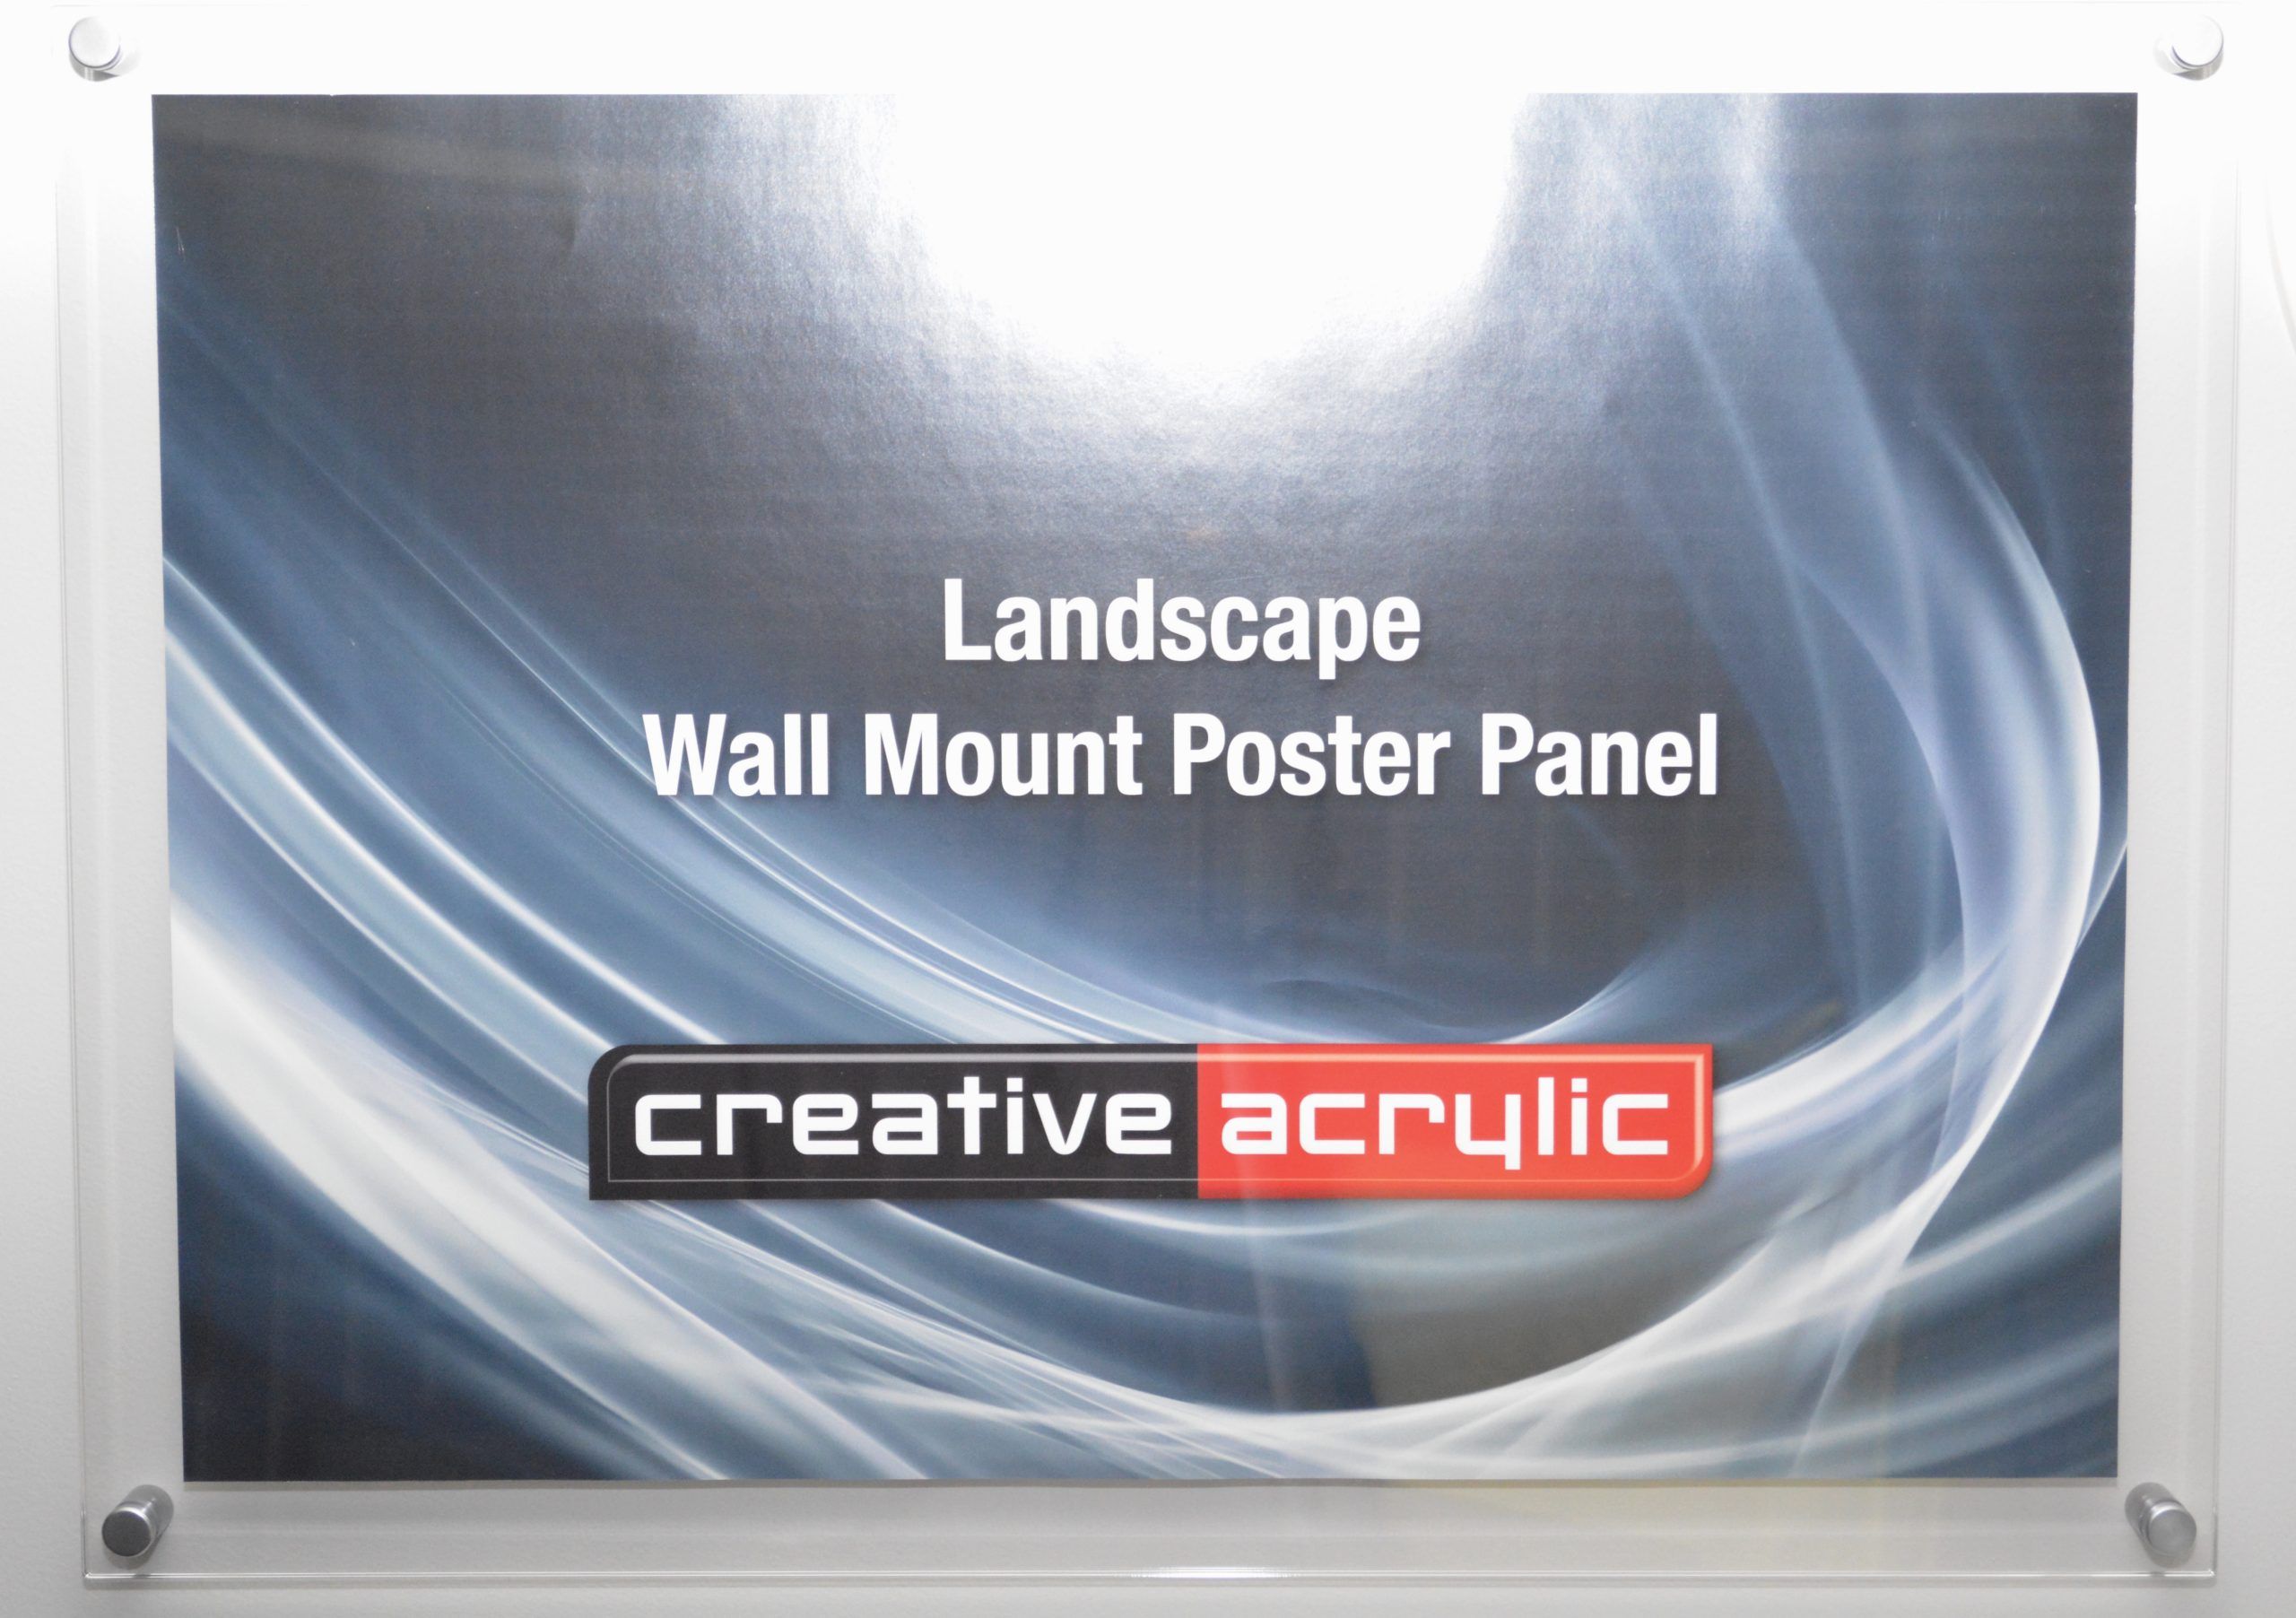 Clear acrylic wall mount poster trap that holds pages between two panels of acrylic, mounted to the wall